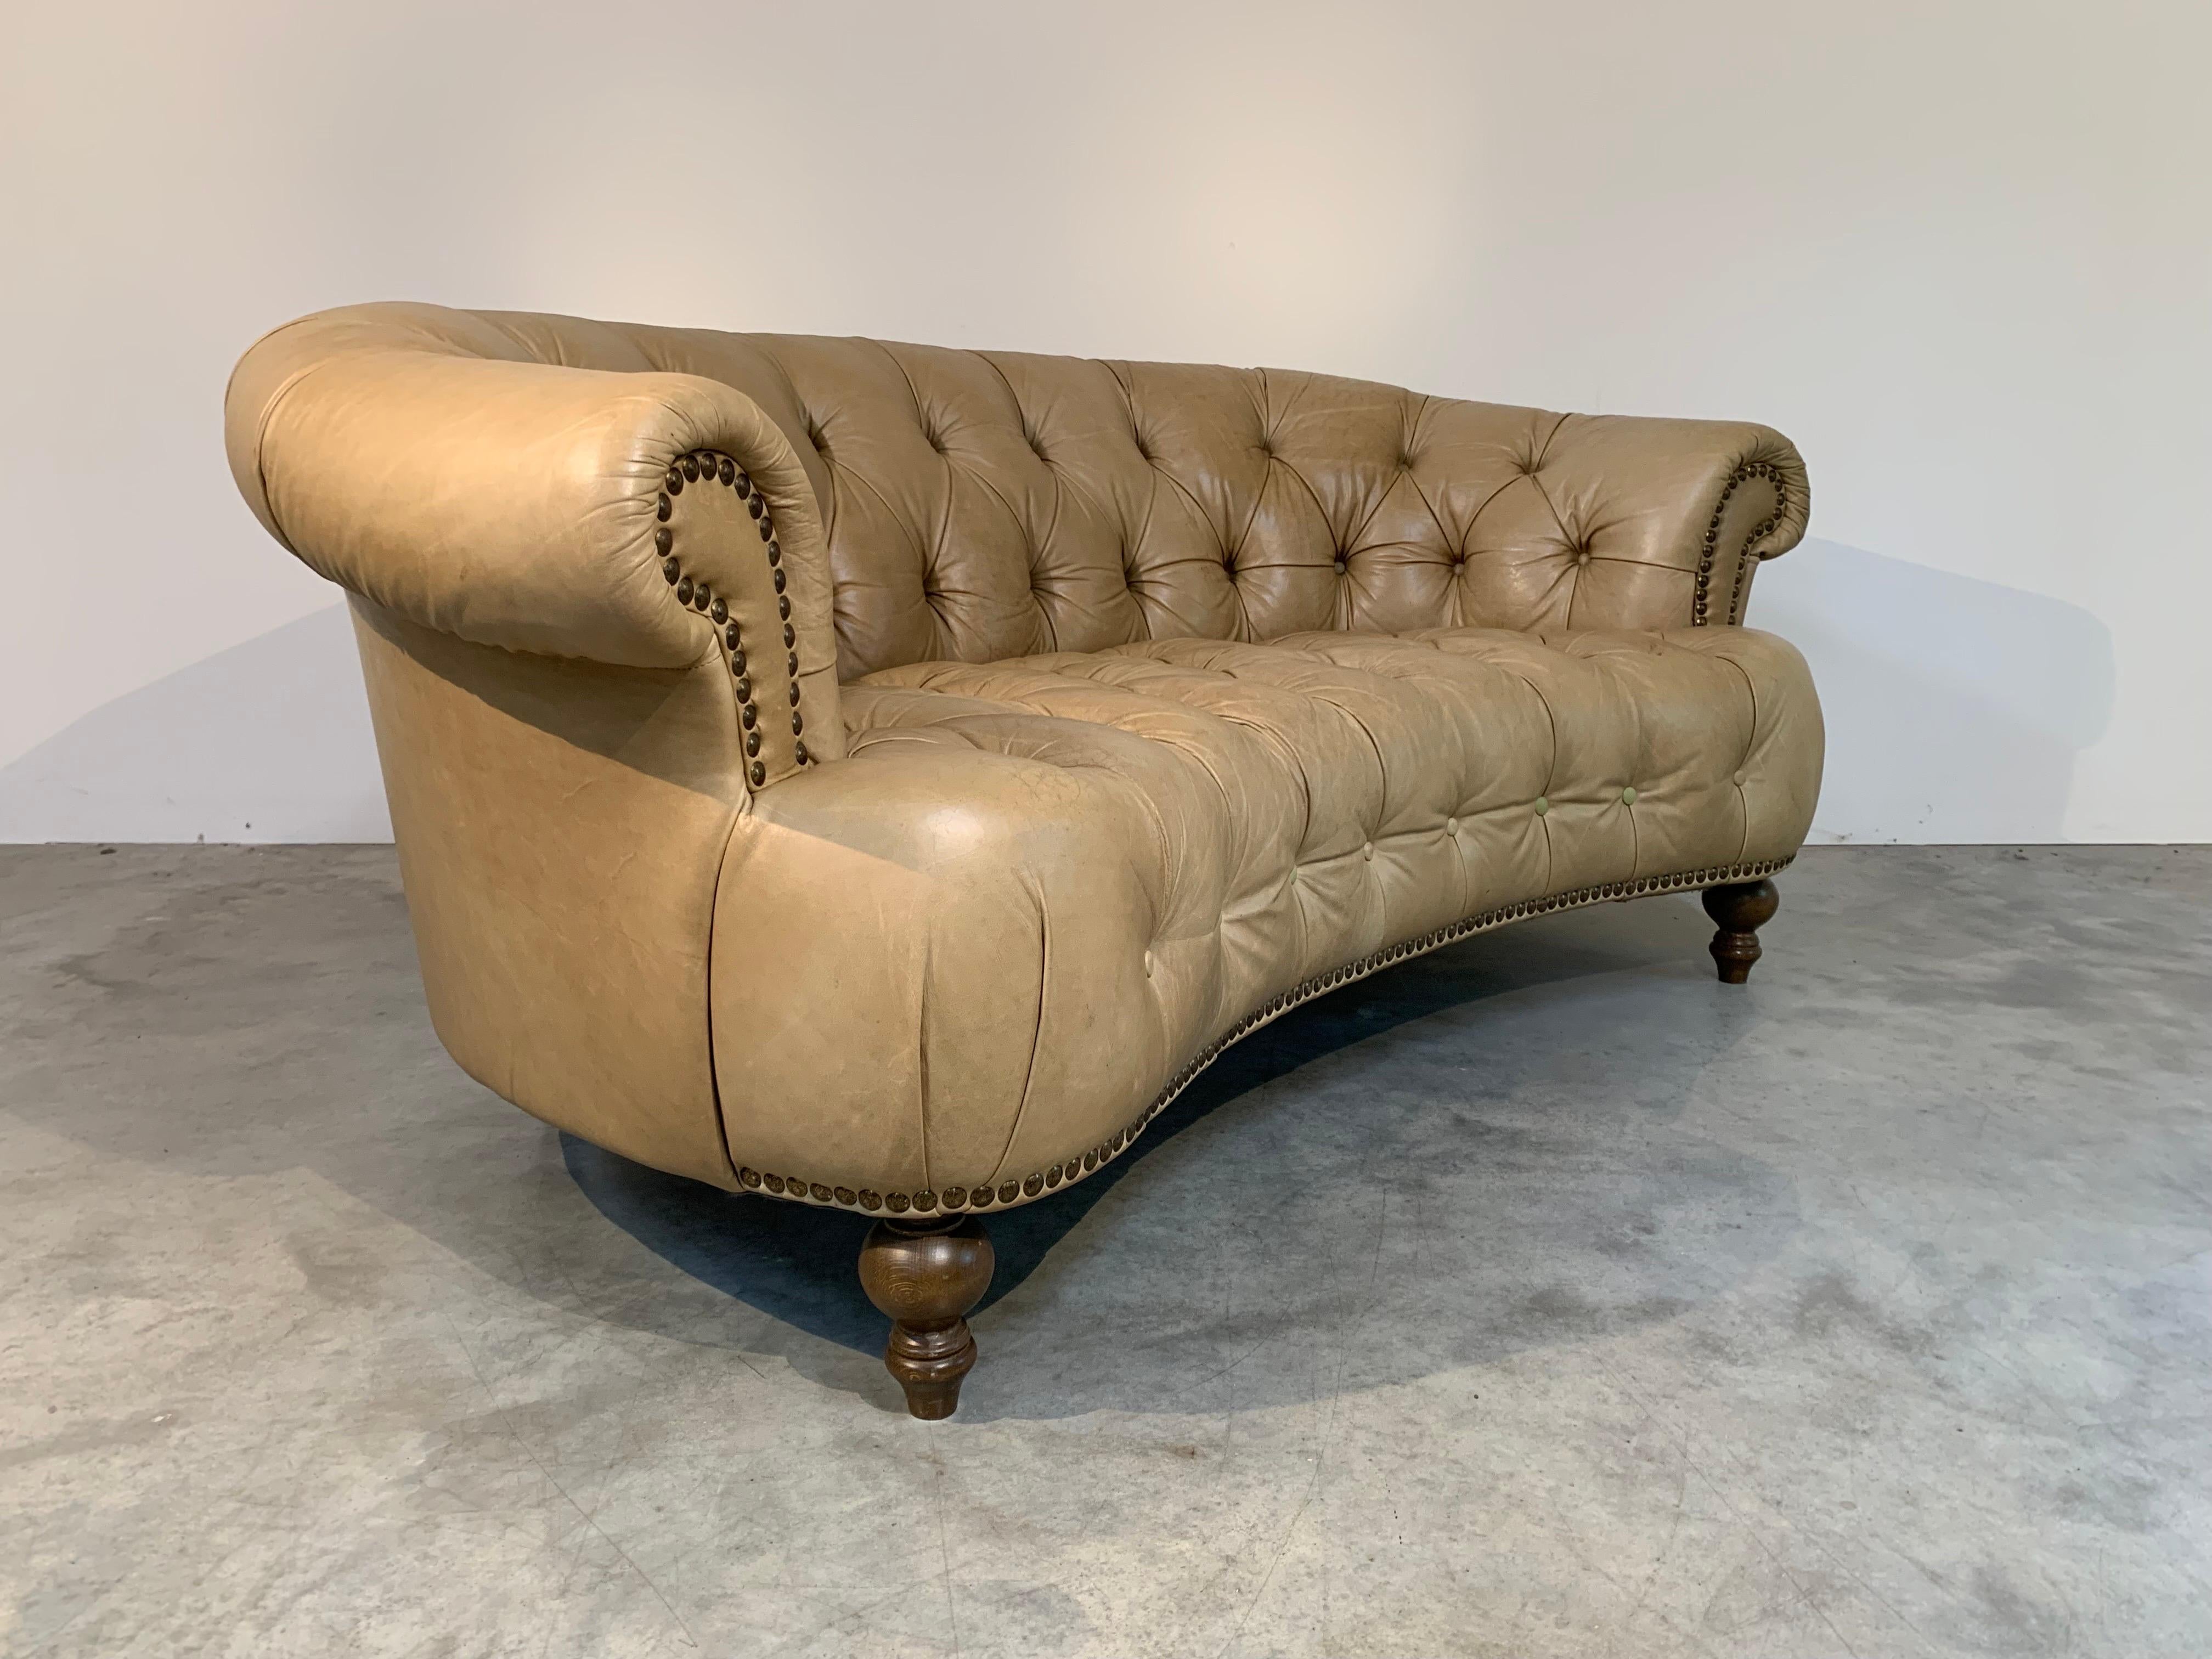 Iconic Chesterfield vintage sofa that was made in Italy and is hallmarked as such having the coveted curvature frame over turned walnut legs  in the design of a Chesterfield sofa, which are typically straight. The leather on this piece is soft and